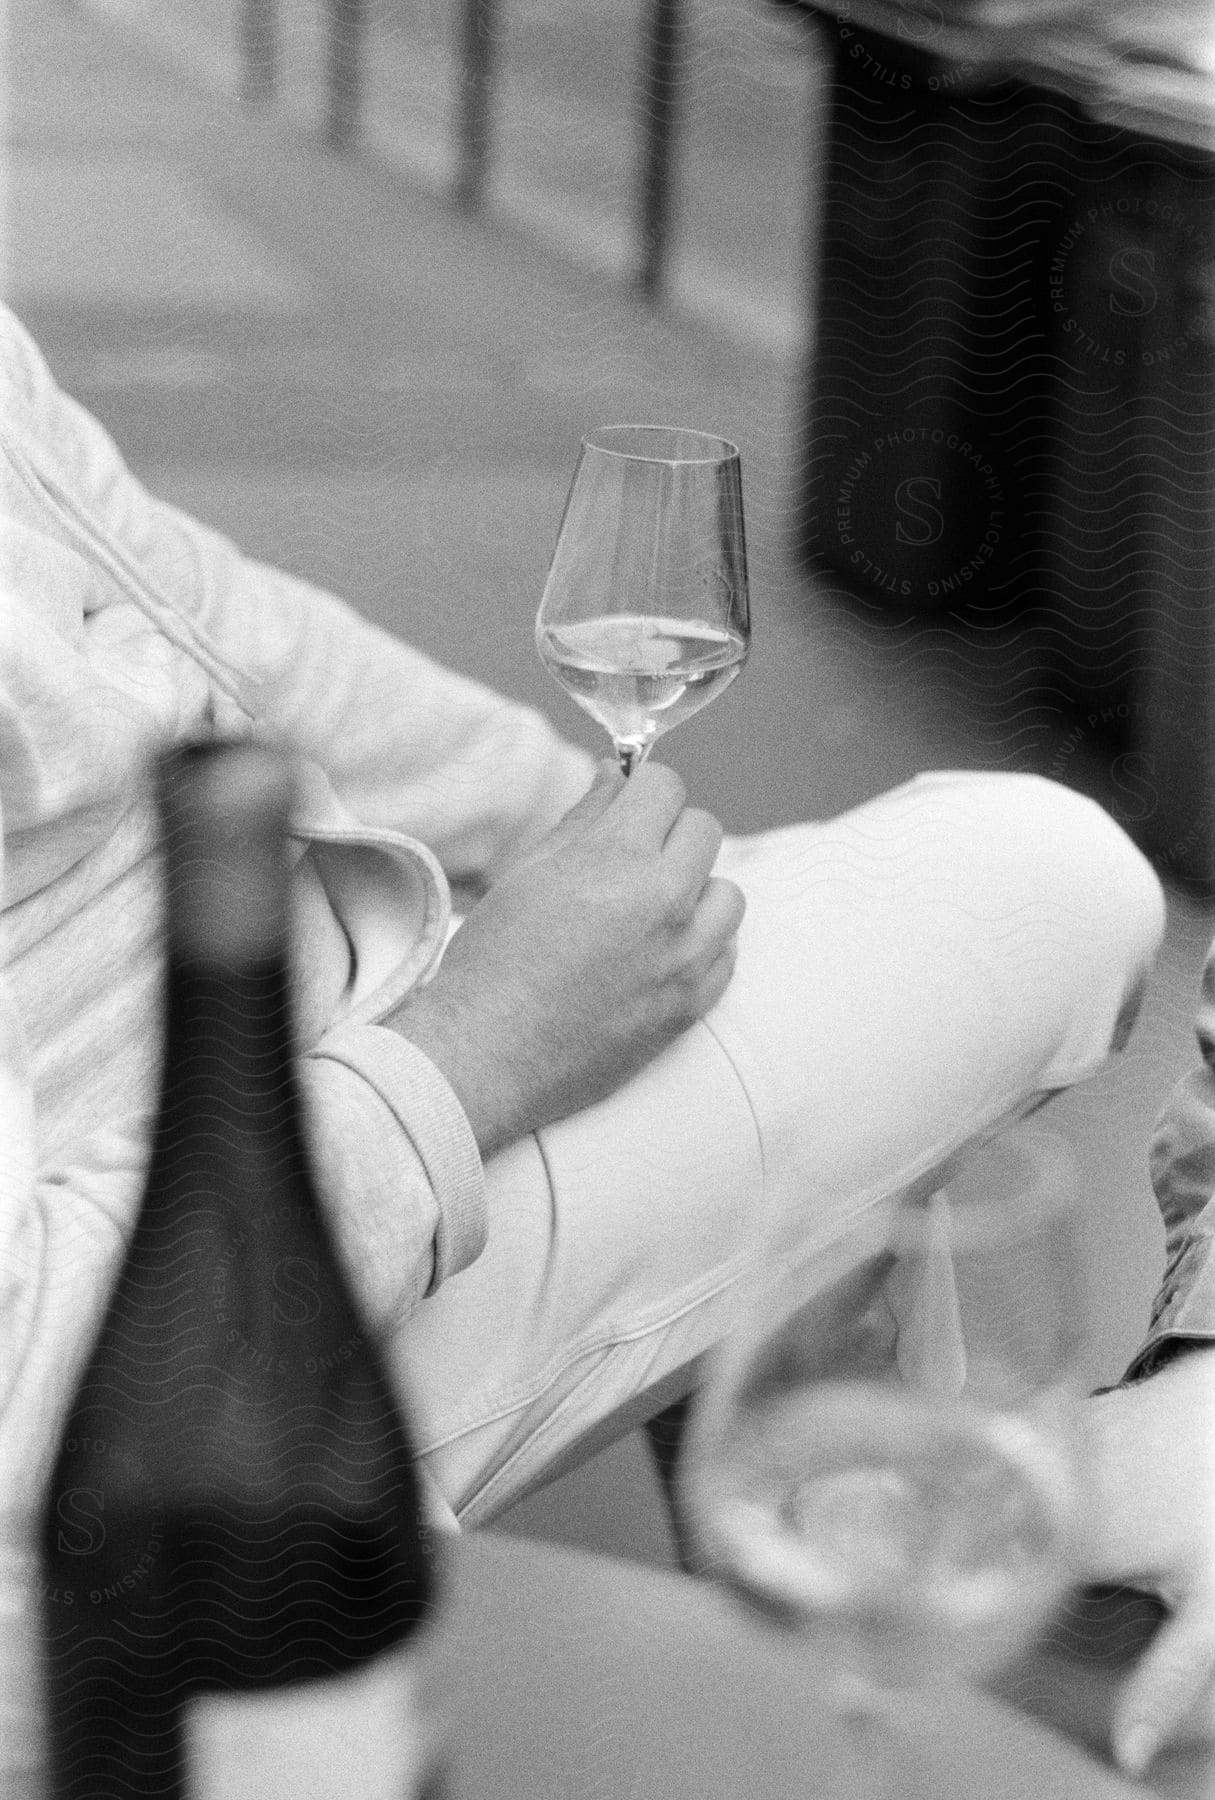 A person is sitting holding a glass of wine in a classic, timeless scene. The setting appears to be outdoors, and the image is in black and white, adding a touch of elegance.